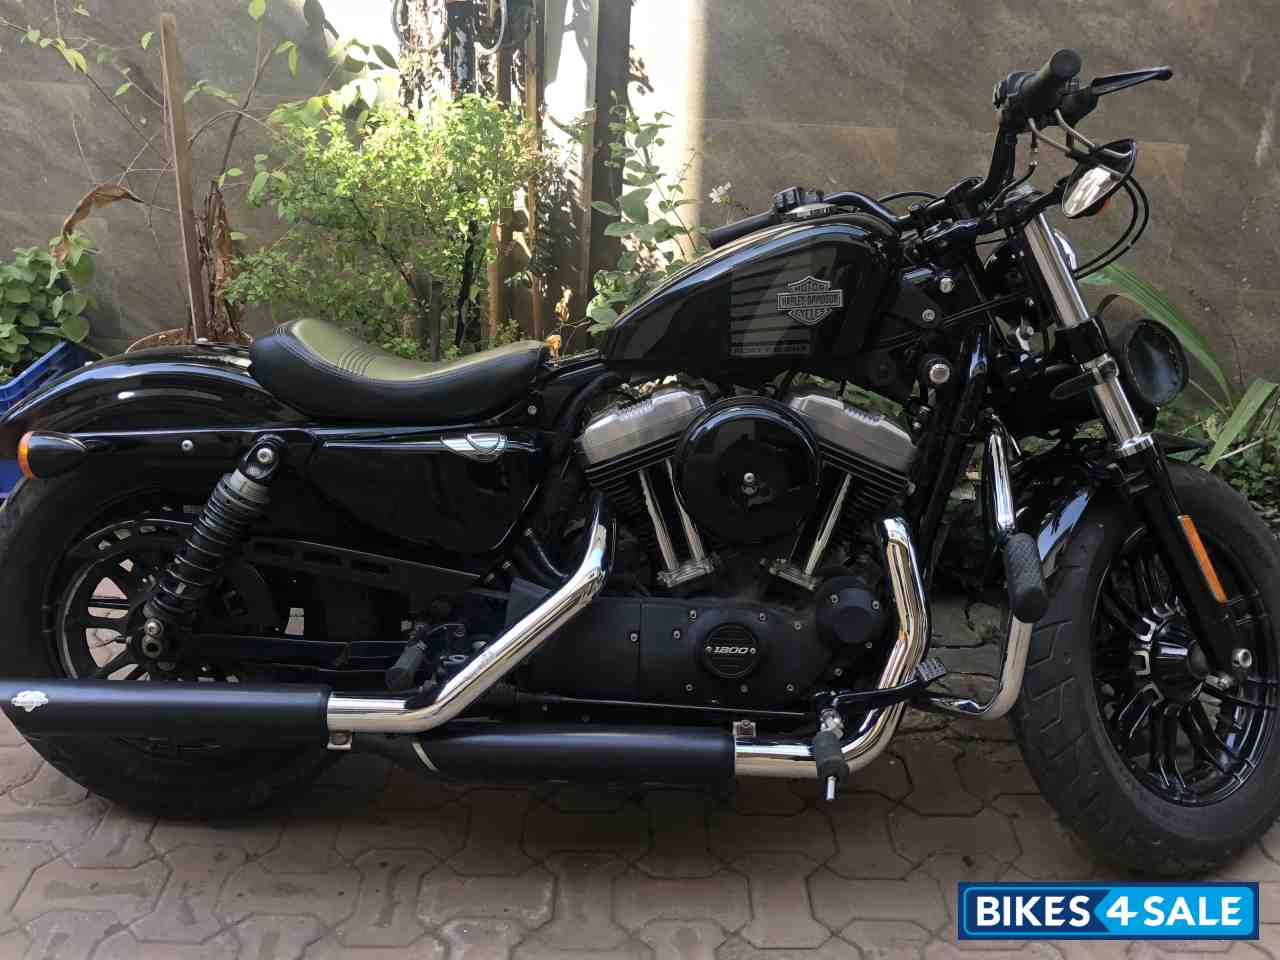 Used 2016 Model Harley Davidson Forty Eight For Sale In Thane Id 208554 Bikes4sale